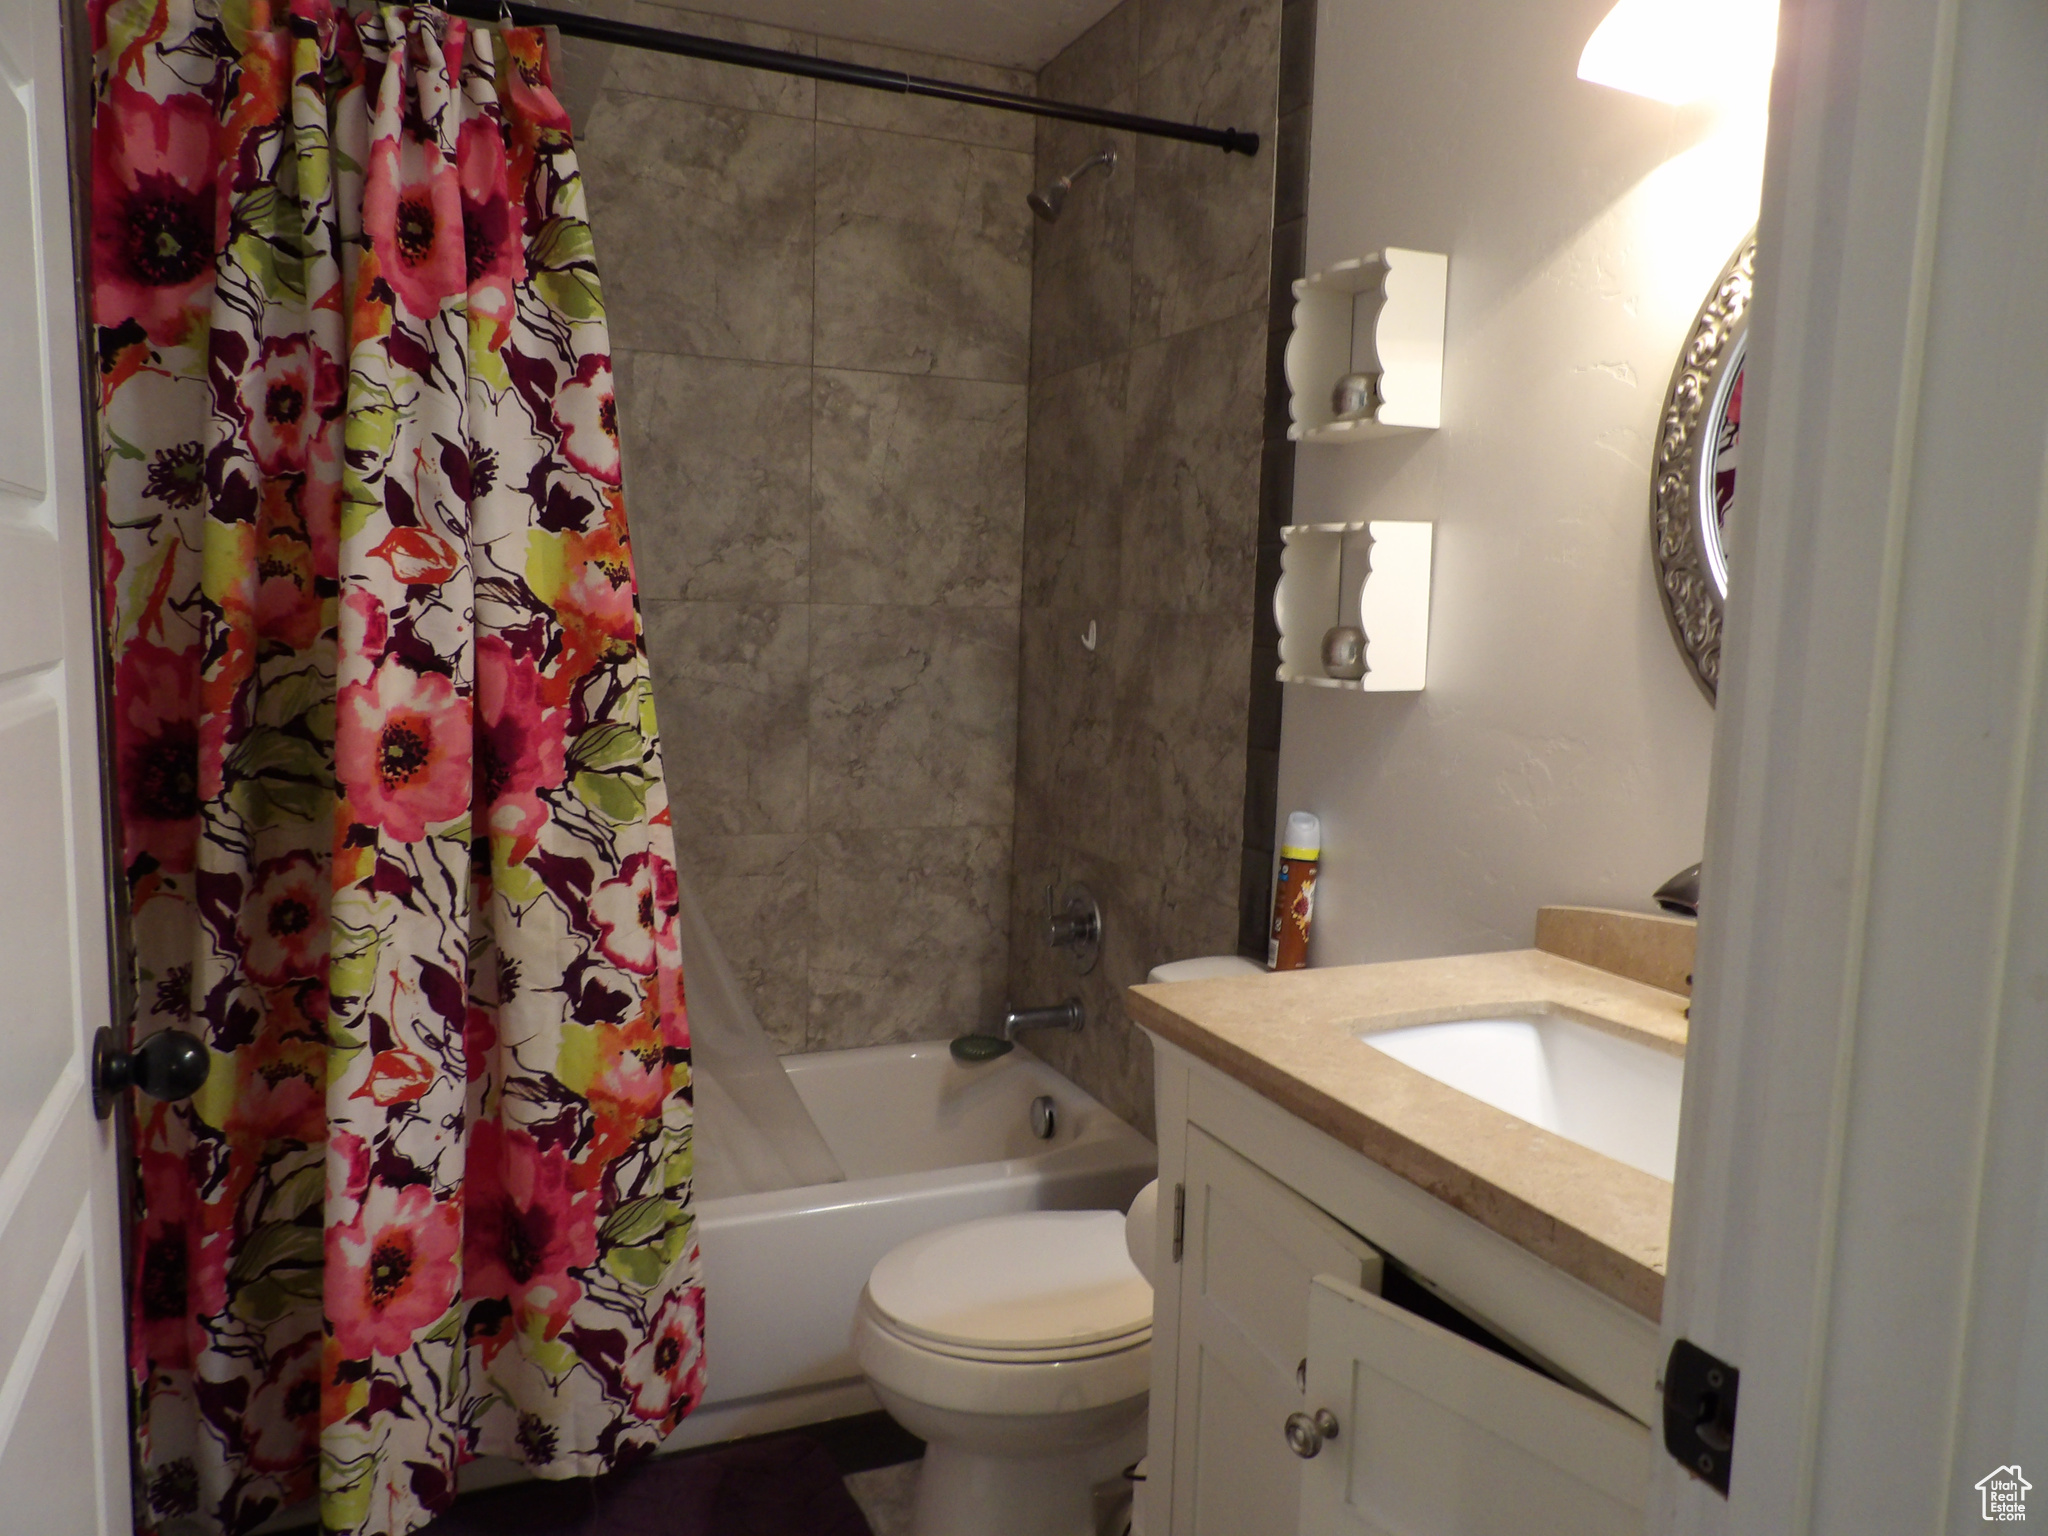 Full bathroom with vanity, shower / tub combo with curtain, and toilet